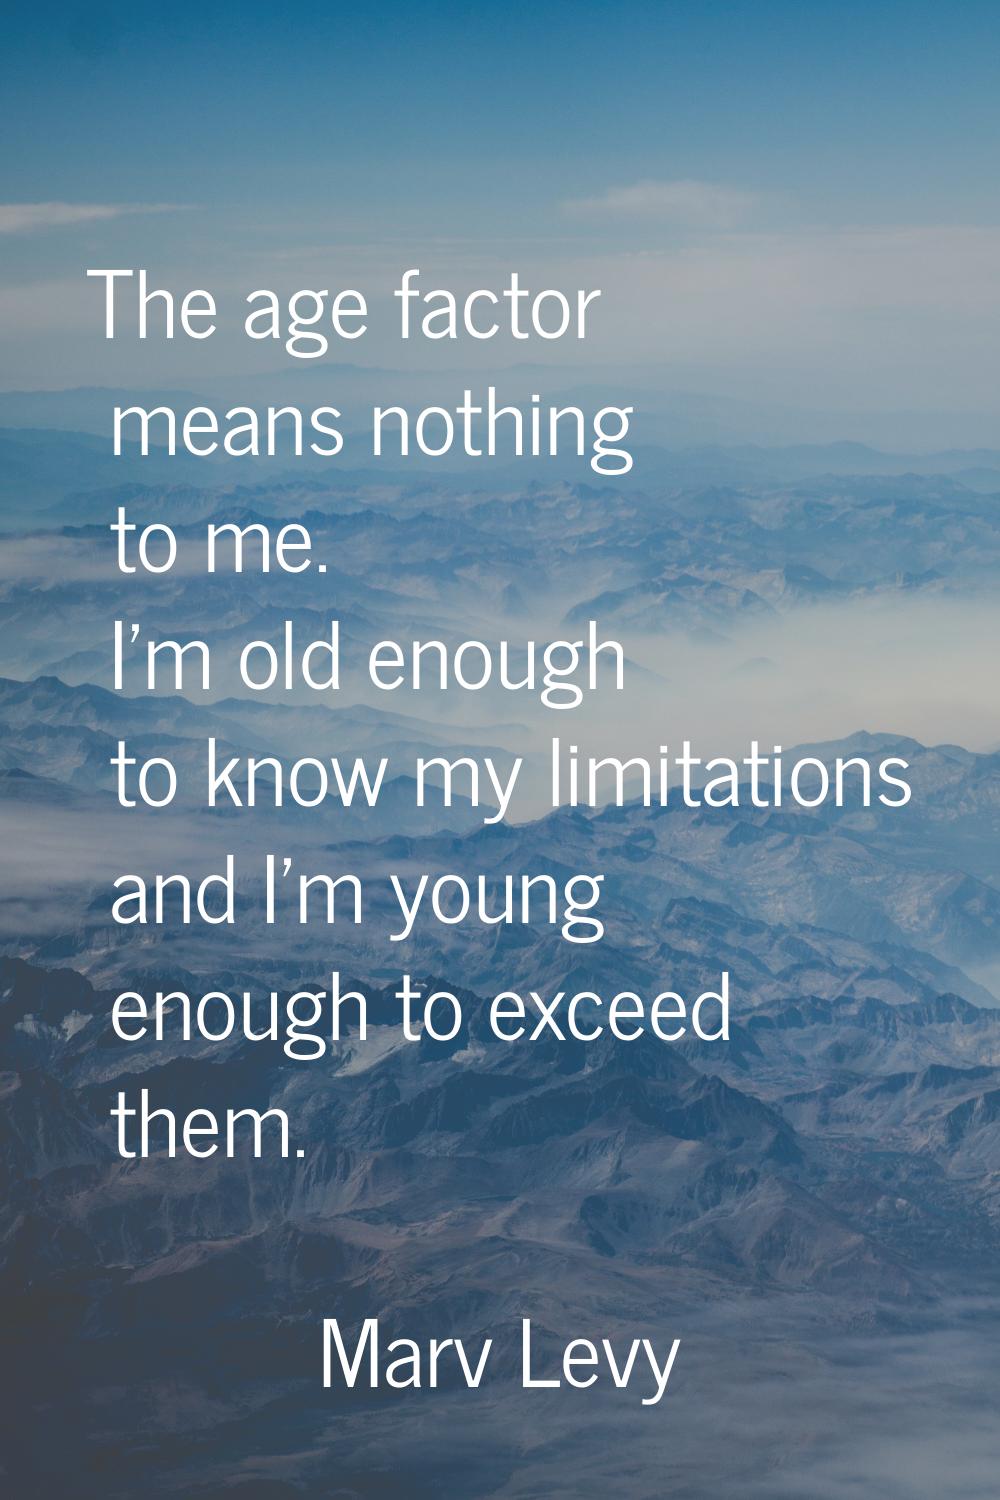 The age factor means nothing to me. I'm old enough to know my limitations and I'm young enough to e